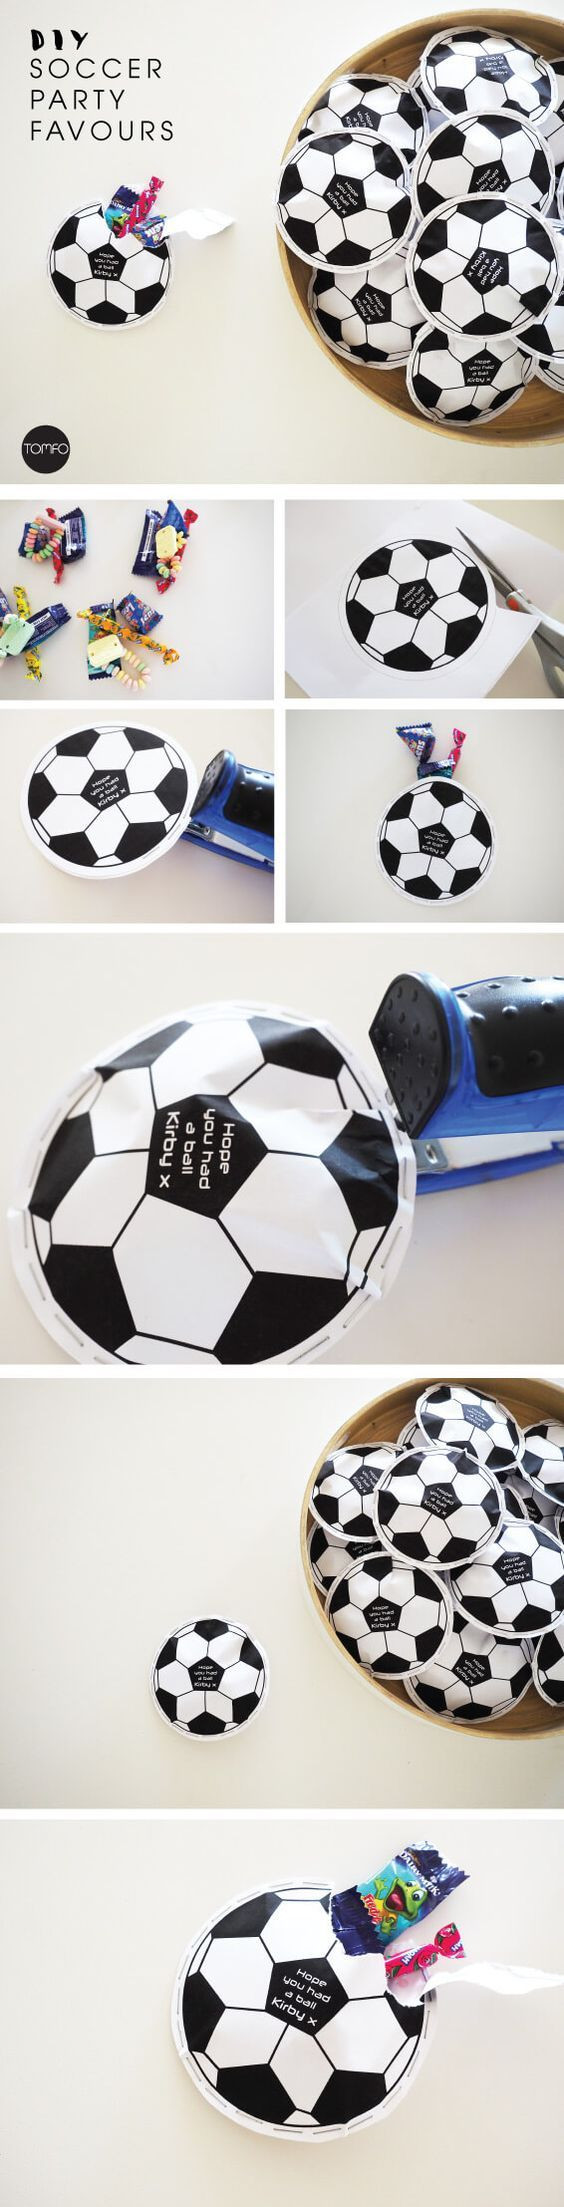 20 Ideal soccer Ball Flower Vases 2024 free download soccer ball flower vases of 47 best soccer banquet images on pinterest flower arrangements inside planning a soccer party try these diy soccer party favours too cute theres